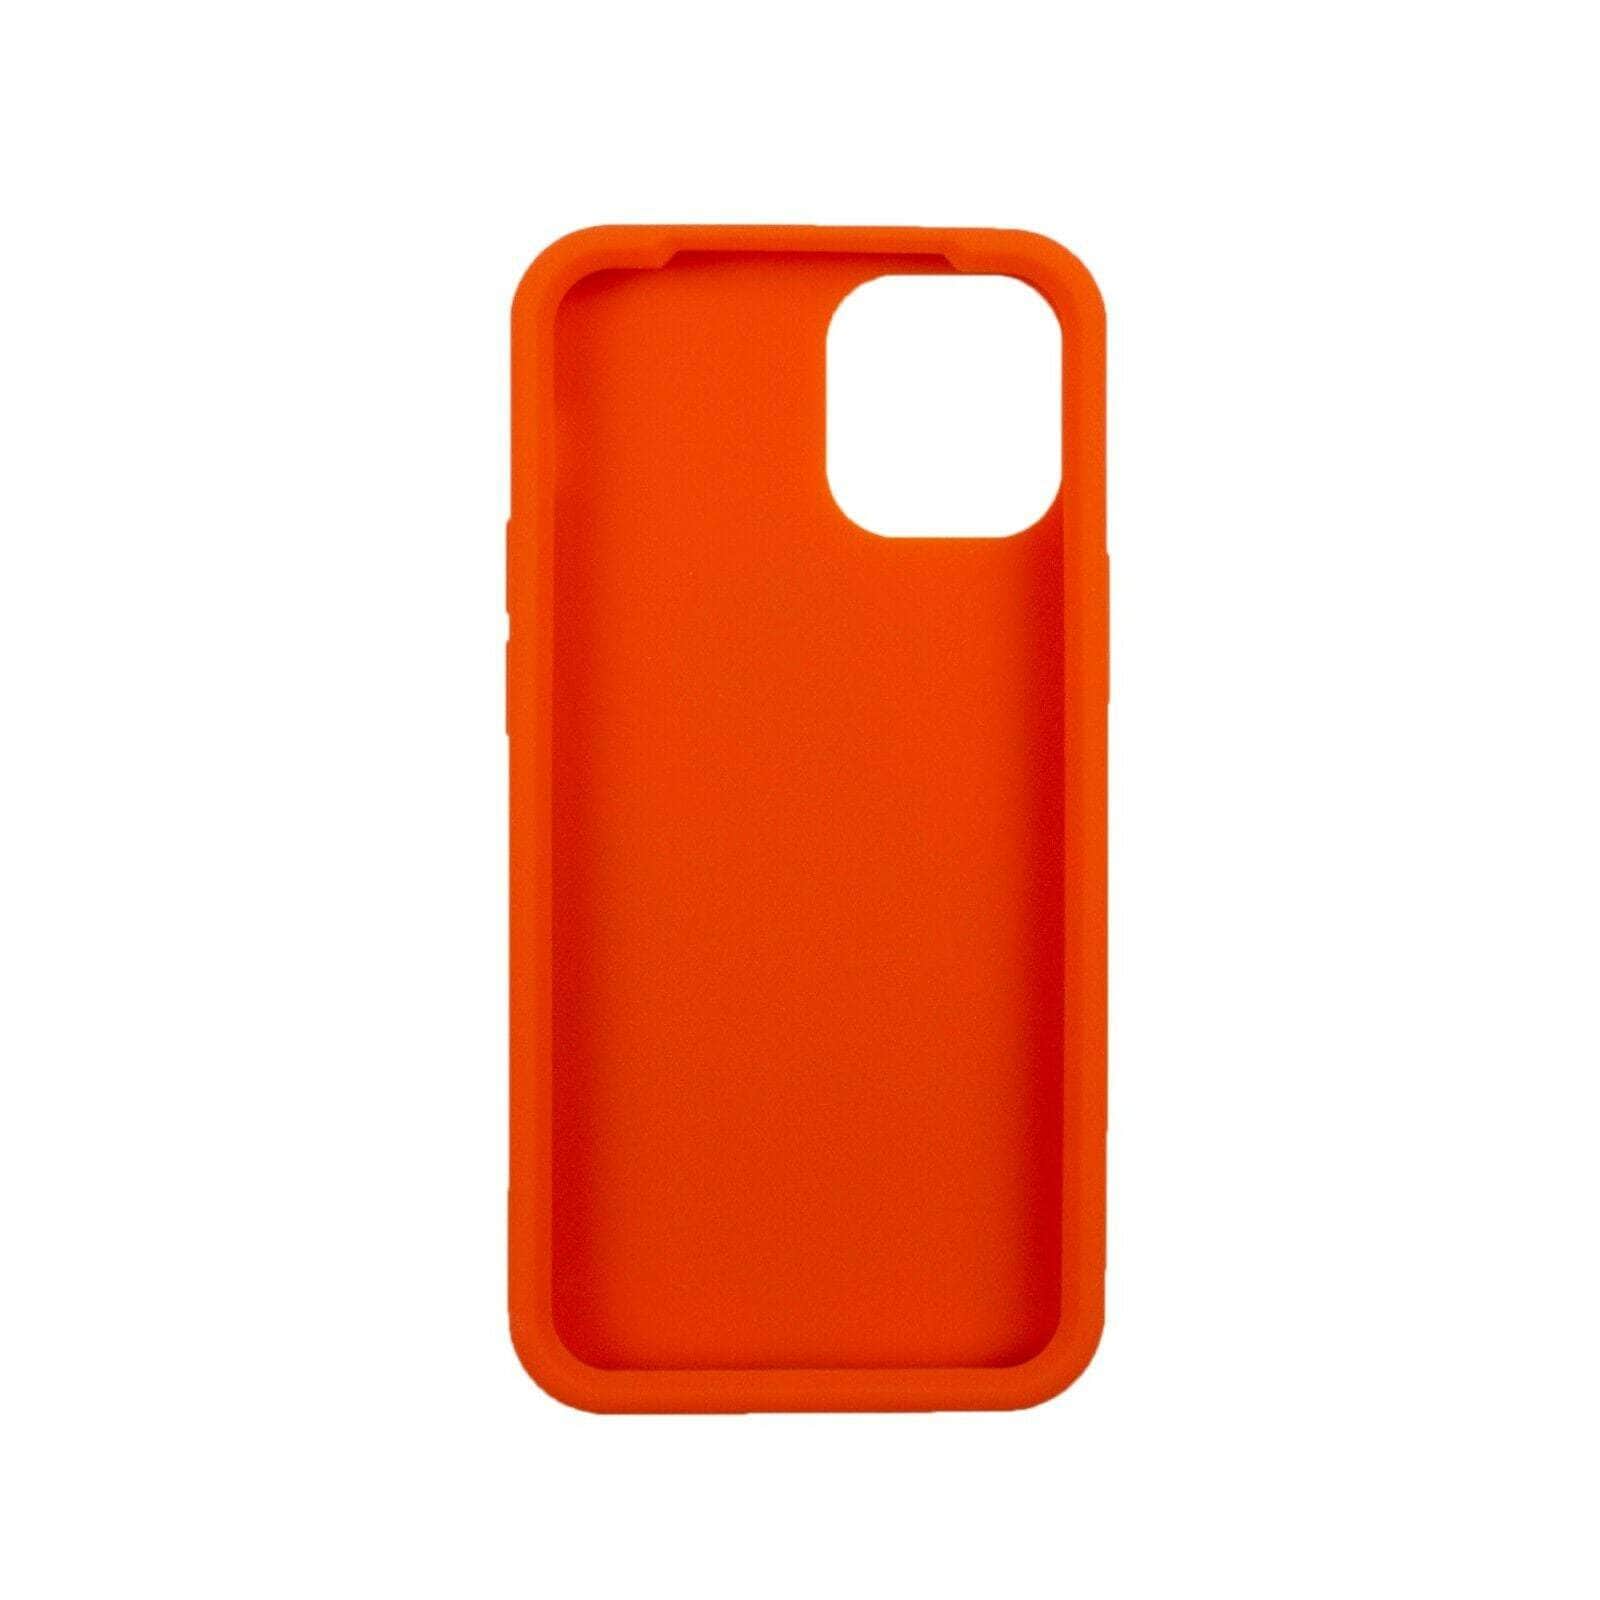 OFF-WHITE c/o VIRGIL ABLOH channelenable-all, chicmi, couponcollection, gender-mens, main-accessories, mens-shoes, off-white-c-o-virgil-abloh, size-os, tech-accessories, under-250 OS Orange Diag iPhone 12 Case 95-OFW-3037/OS 95-OFW-3037/OS